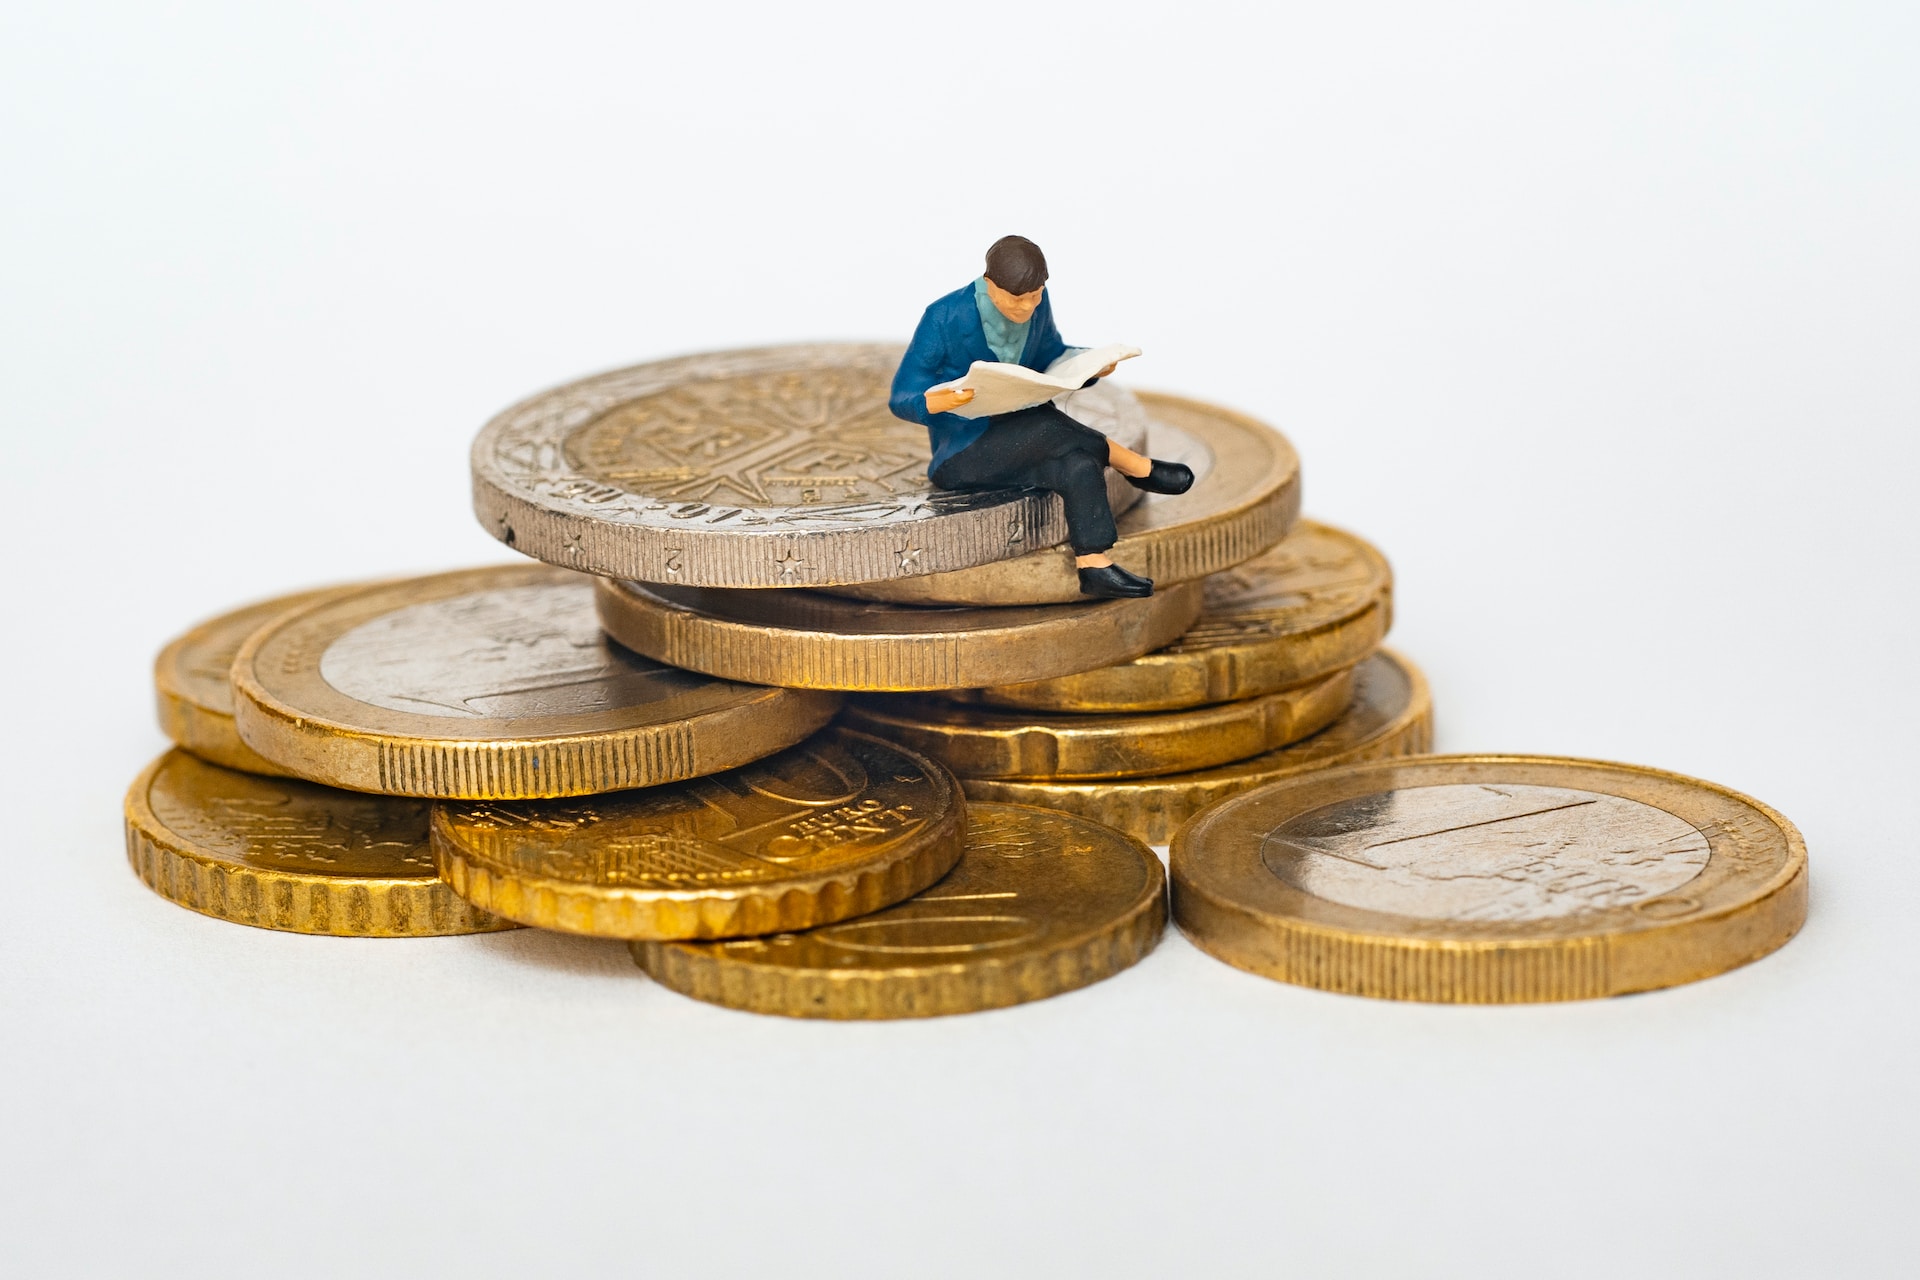 figurine of a man reading a newspaper sat on a stack of euro coins